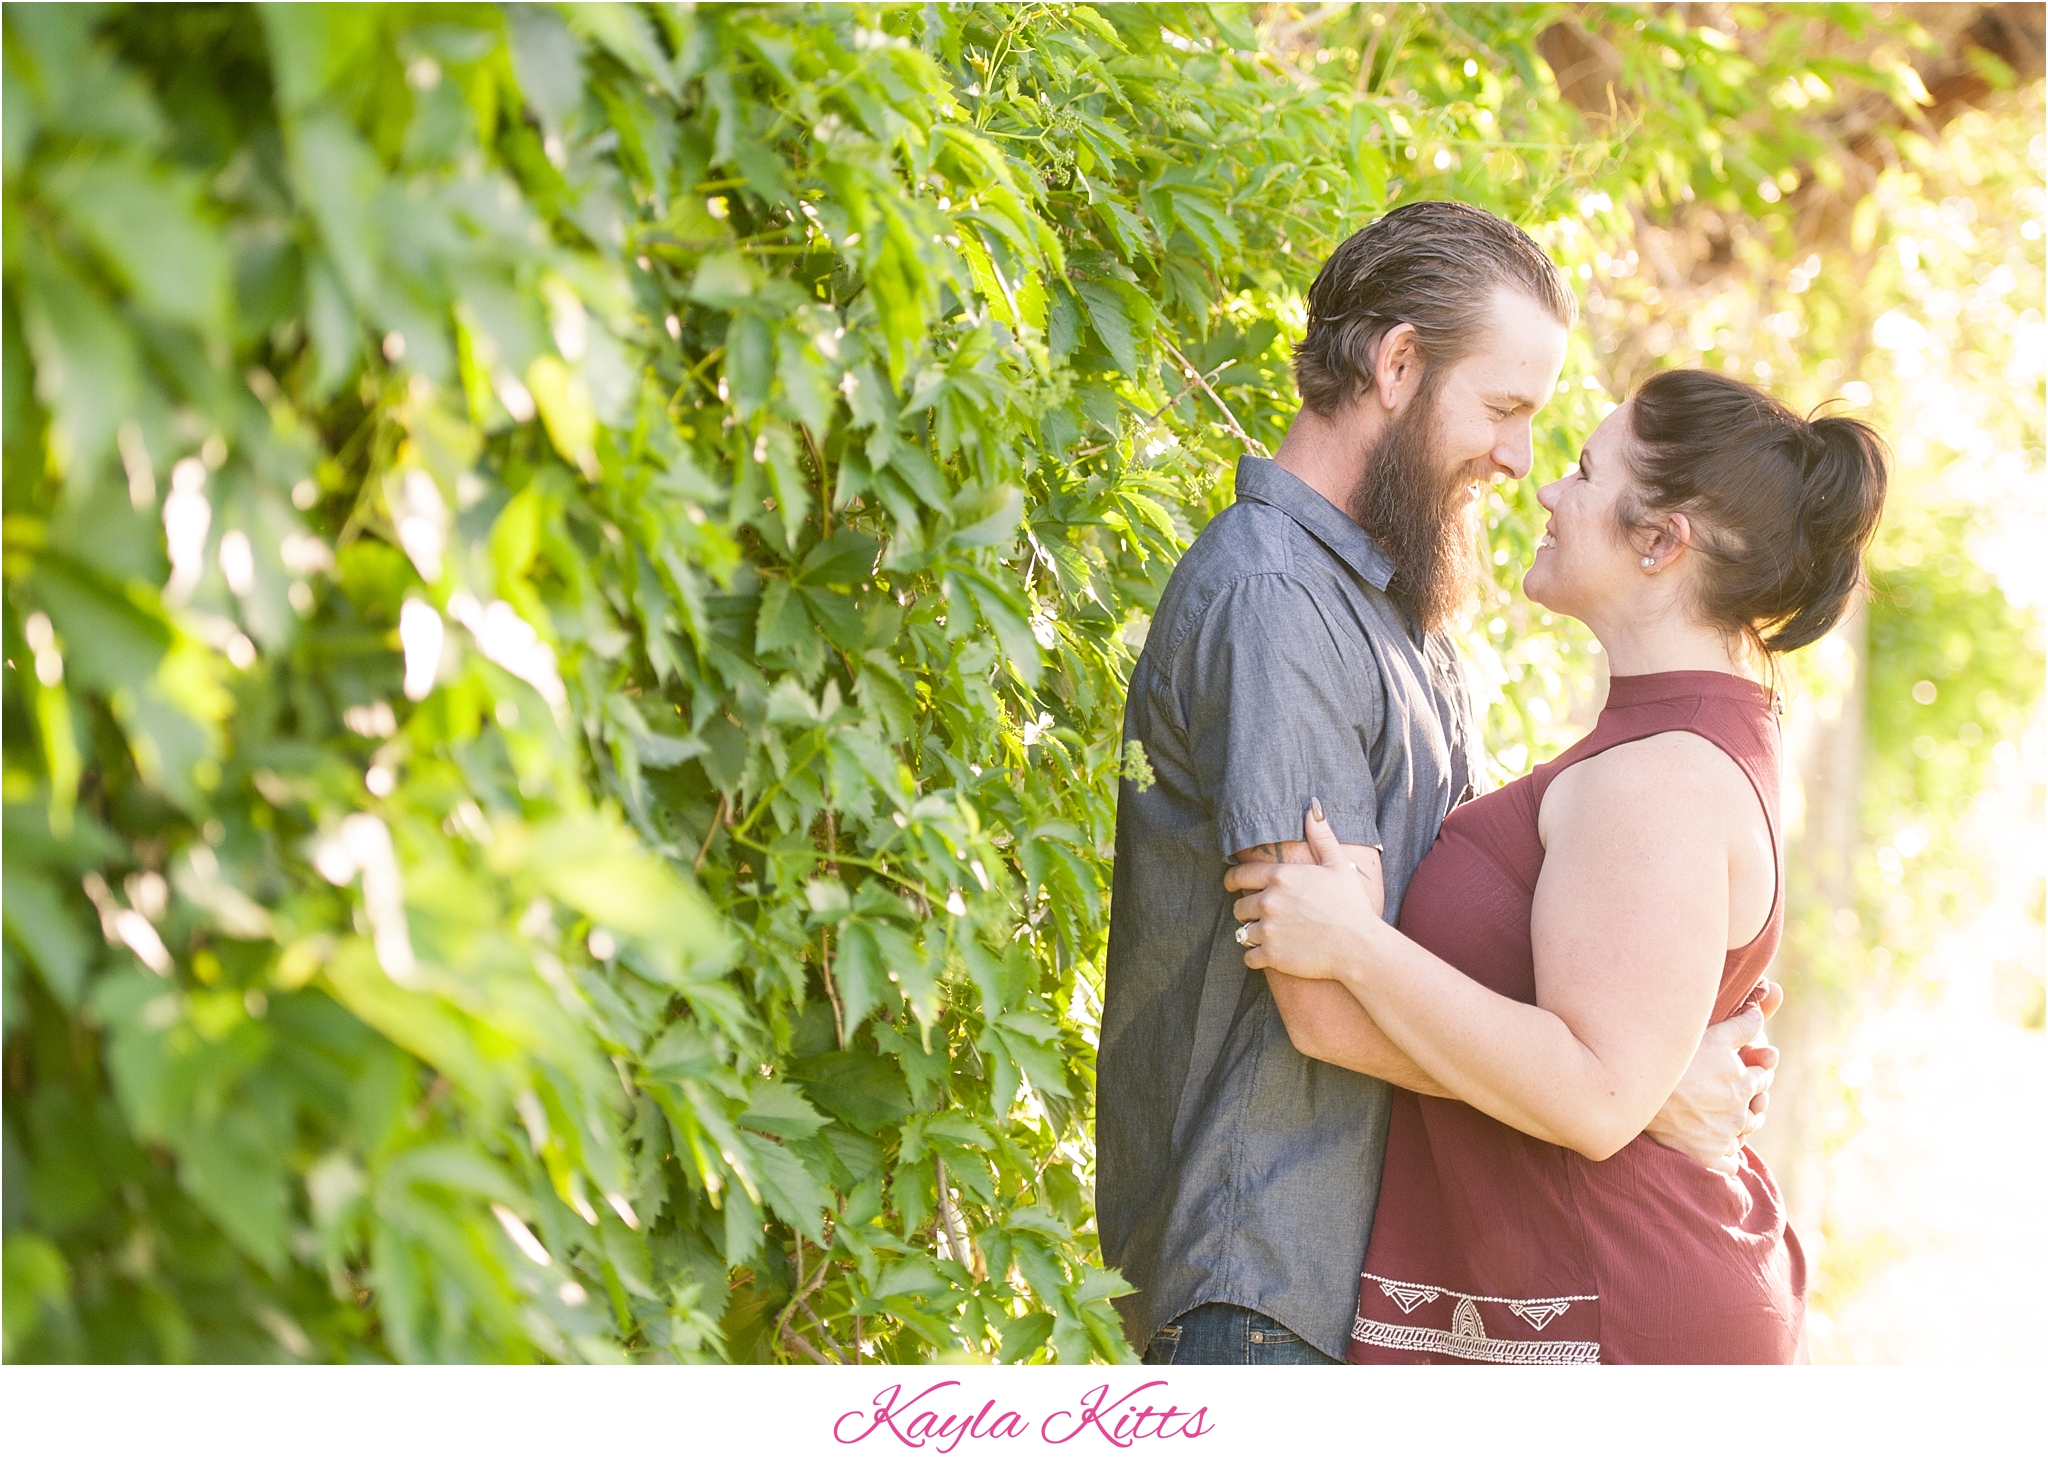 kayla kitts photography - albuquerque wedding photographer - albuquerque engagement photographer - nm wedding - albuquerque wedding - nm wedding - unm engagement - bosque engagement session_0011.jpg